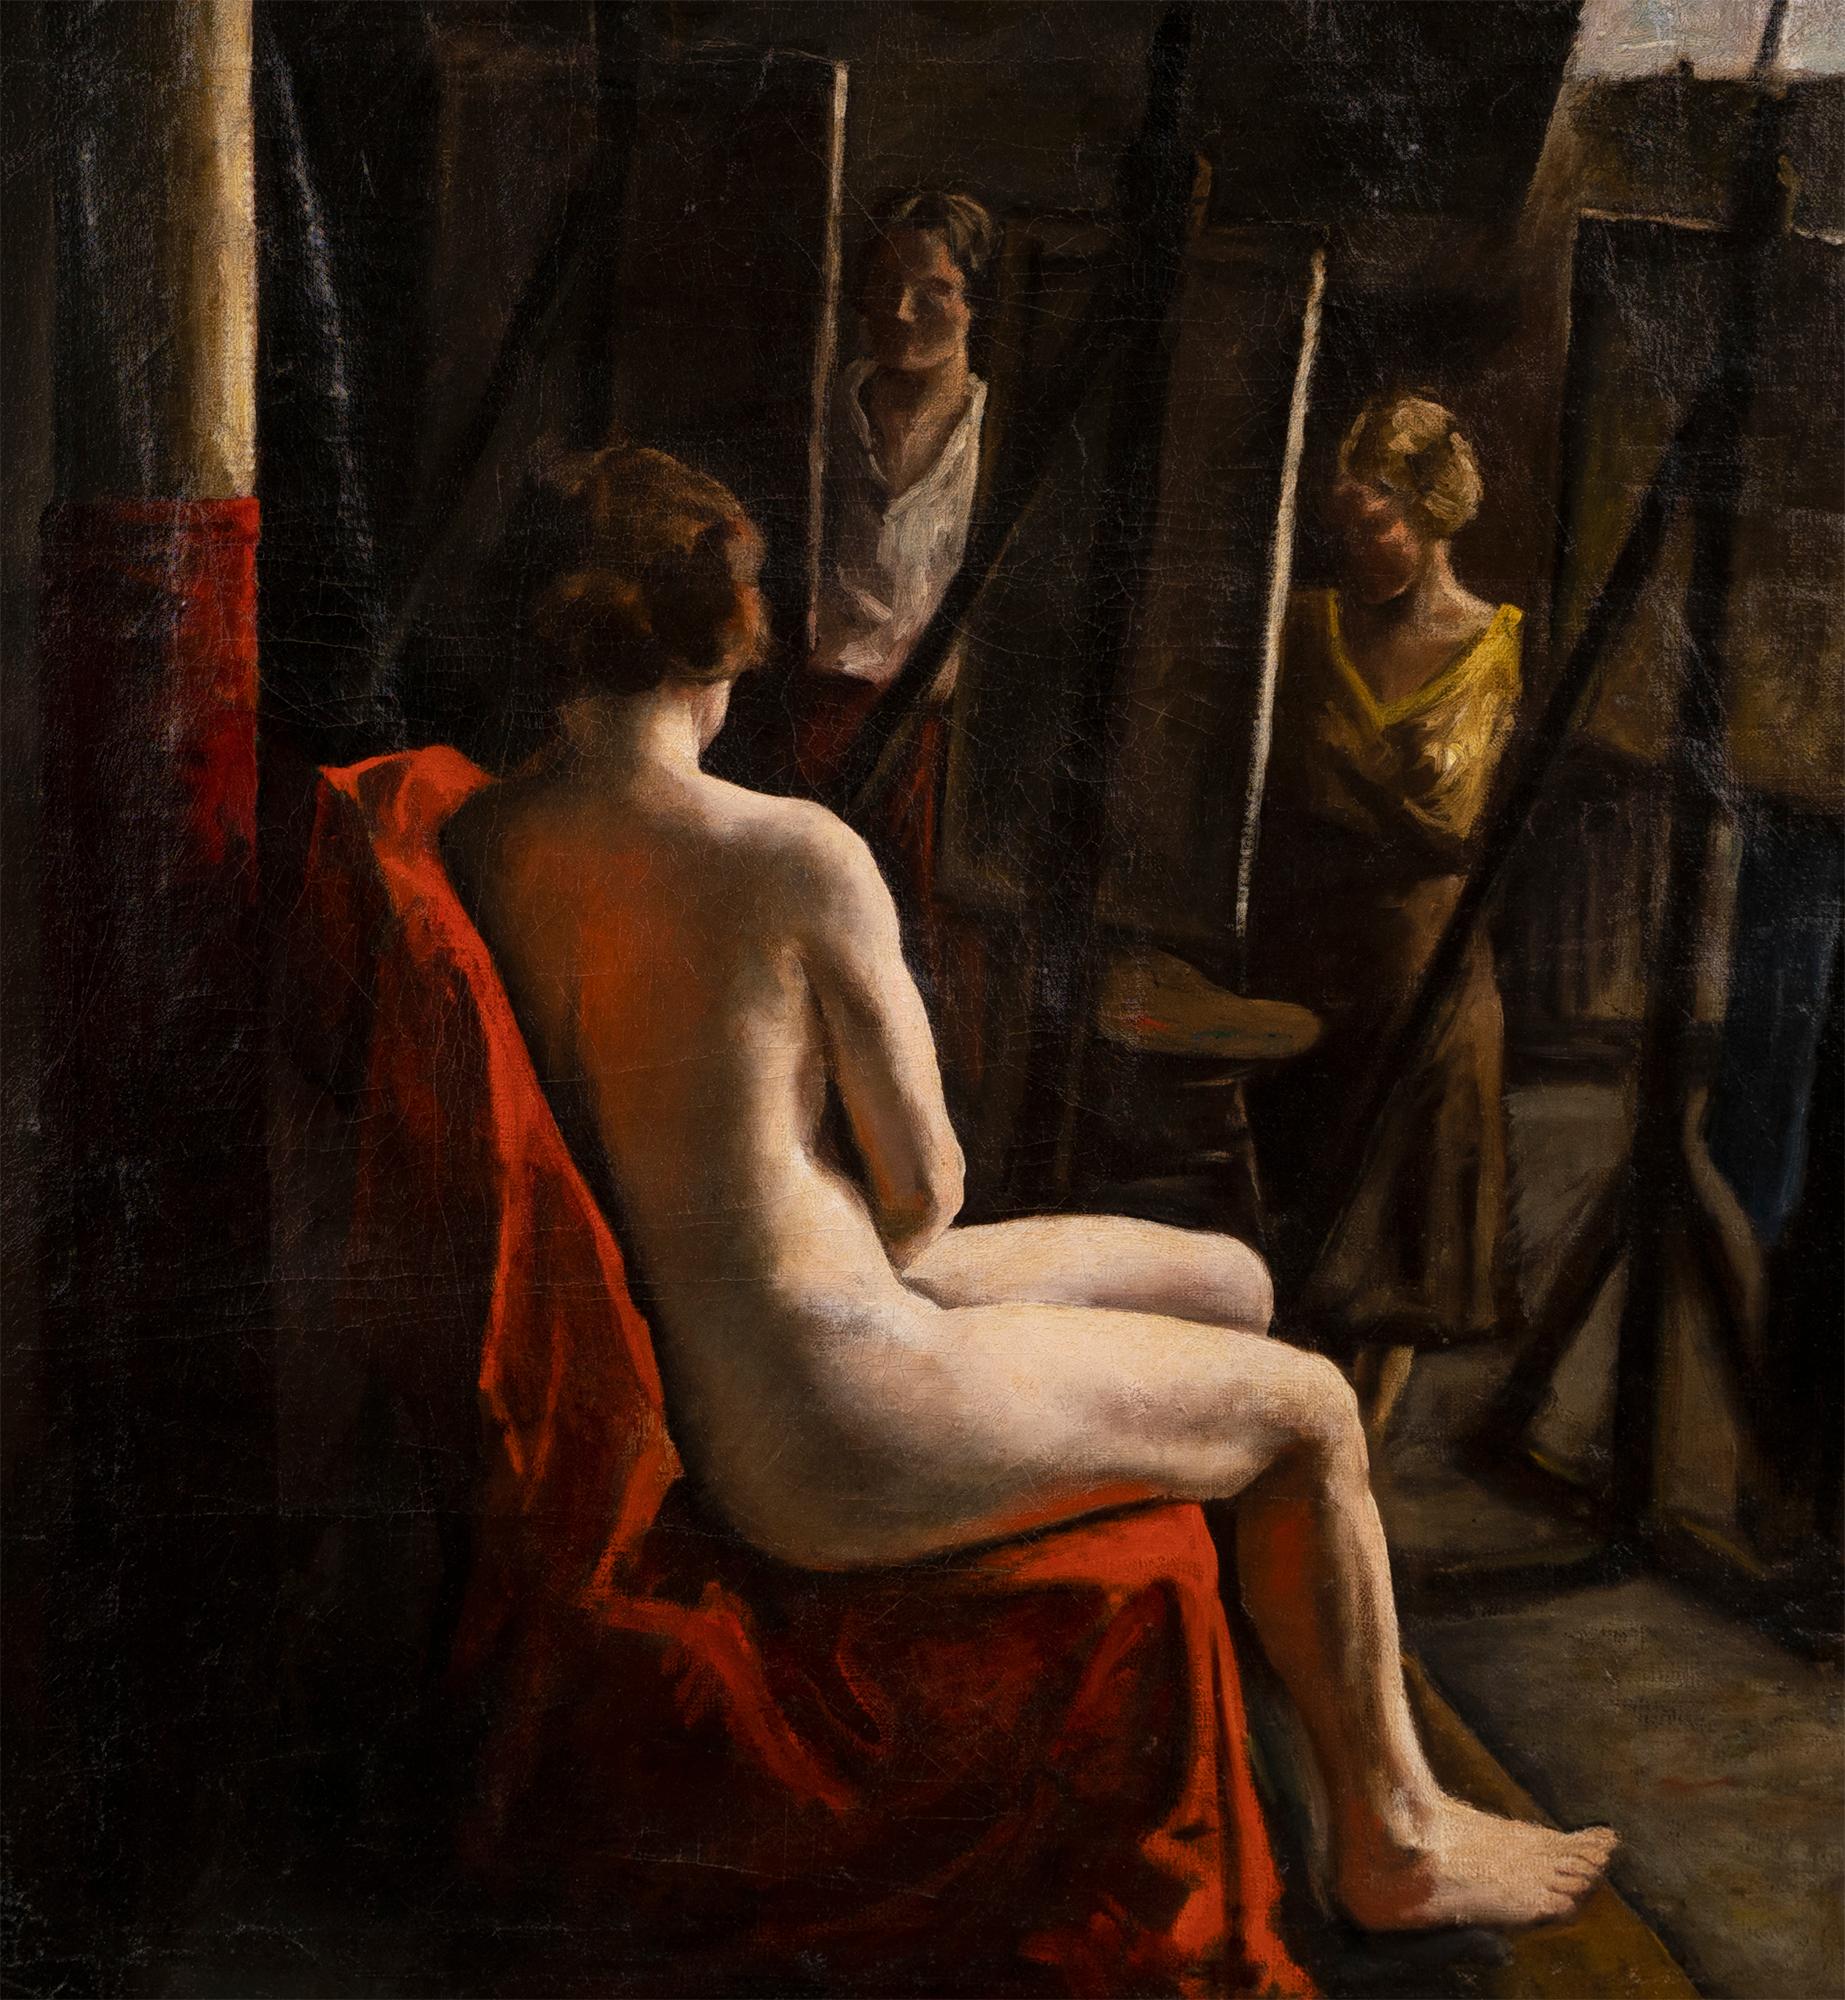 Antique American impressionist interior female nude artist studio oil painting.  Oil on canvas, circa 1910.  No signature found.  Image size, 24L x 26H.  Housed in a giltwood frame.